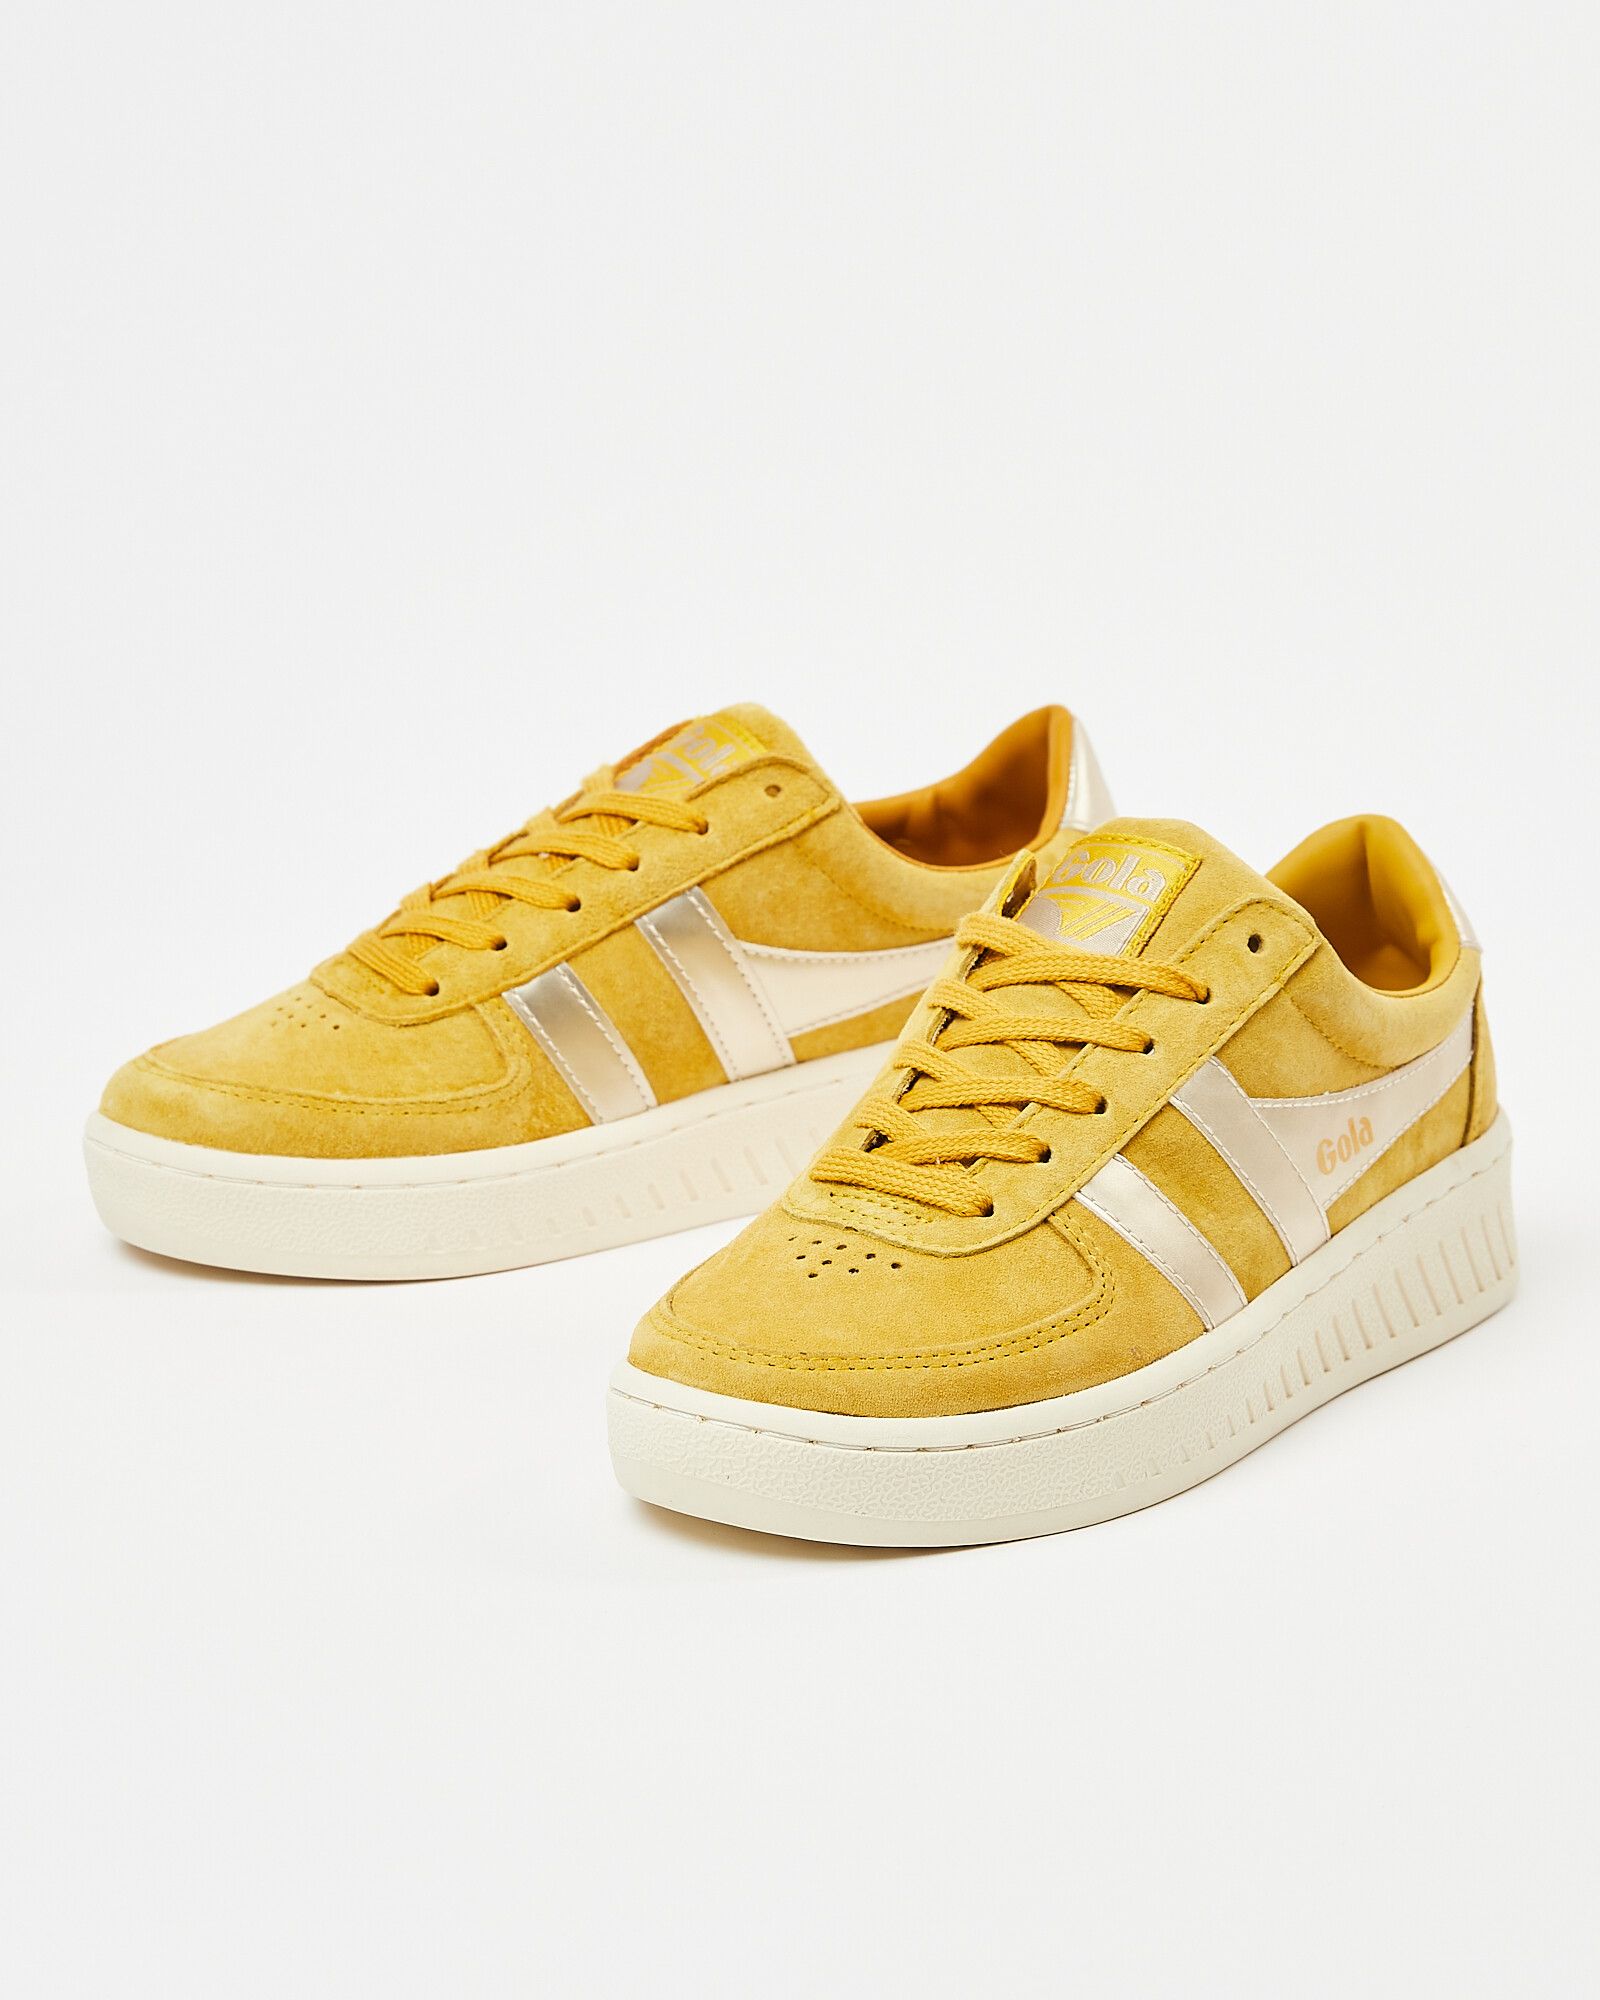 Gola Grandslam Pearl Sunny Yellow Leather Trainers | Oliver Bonas